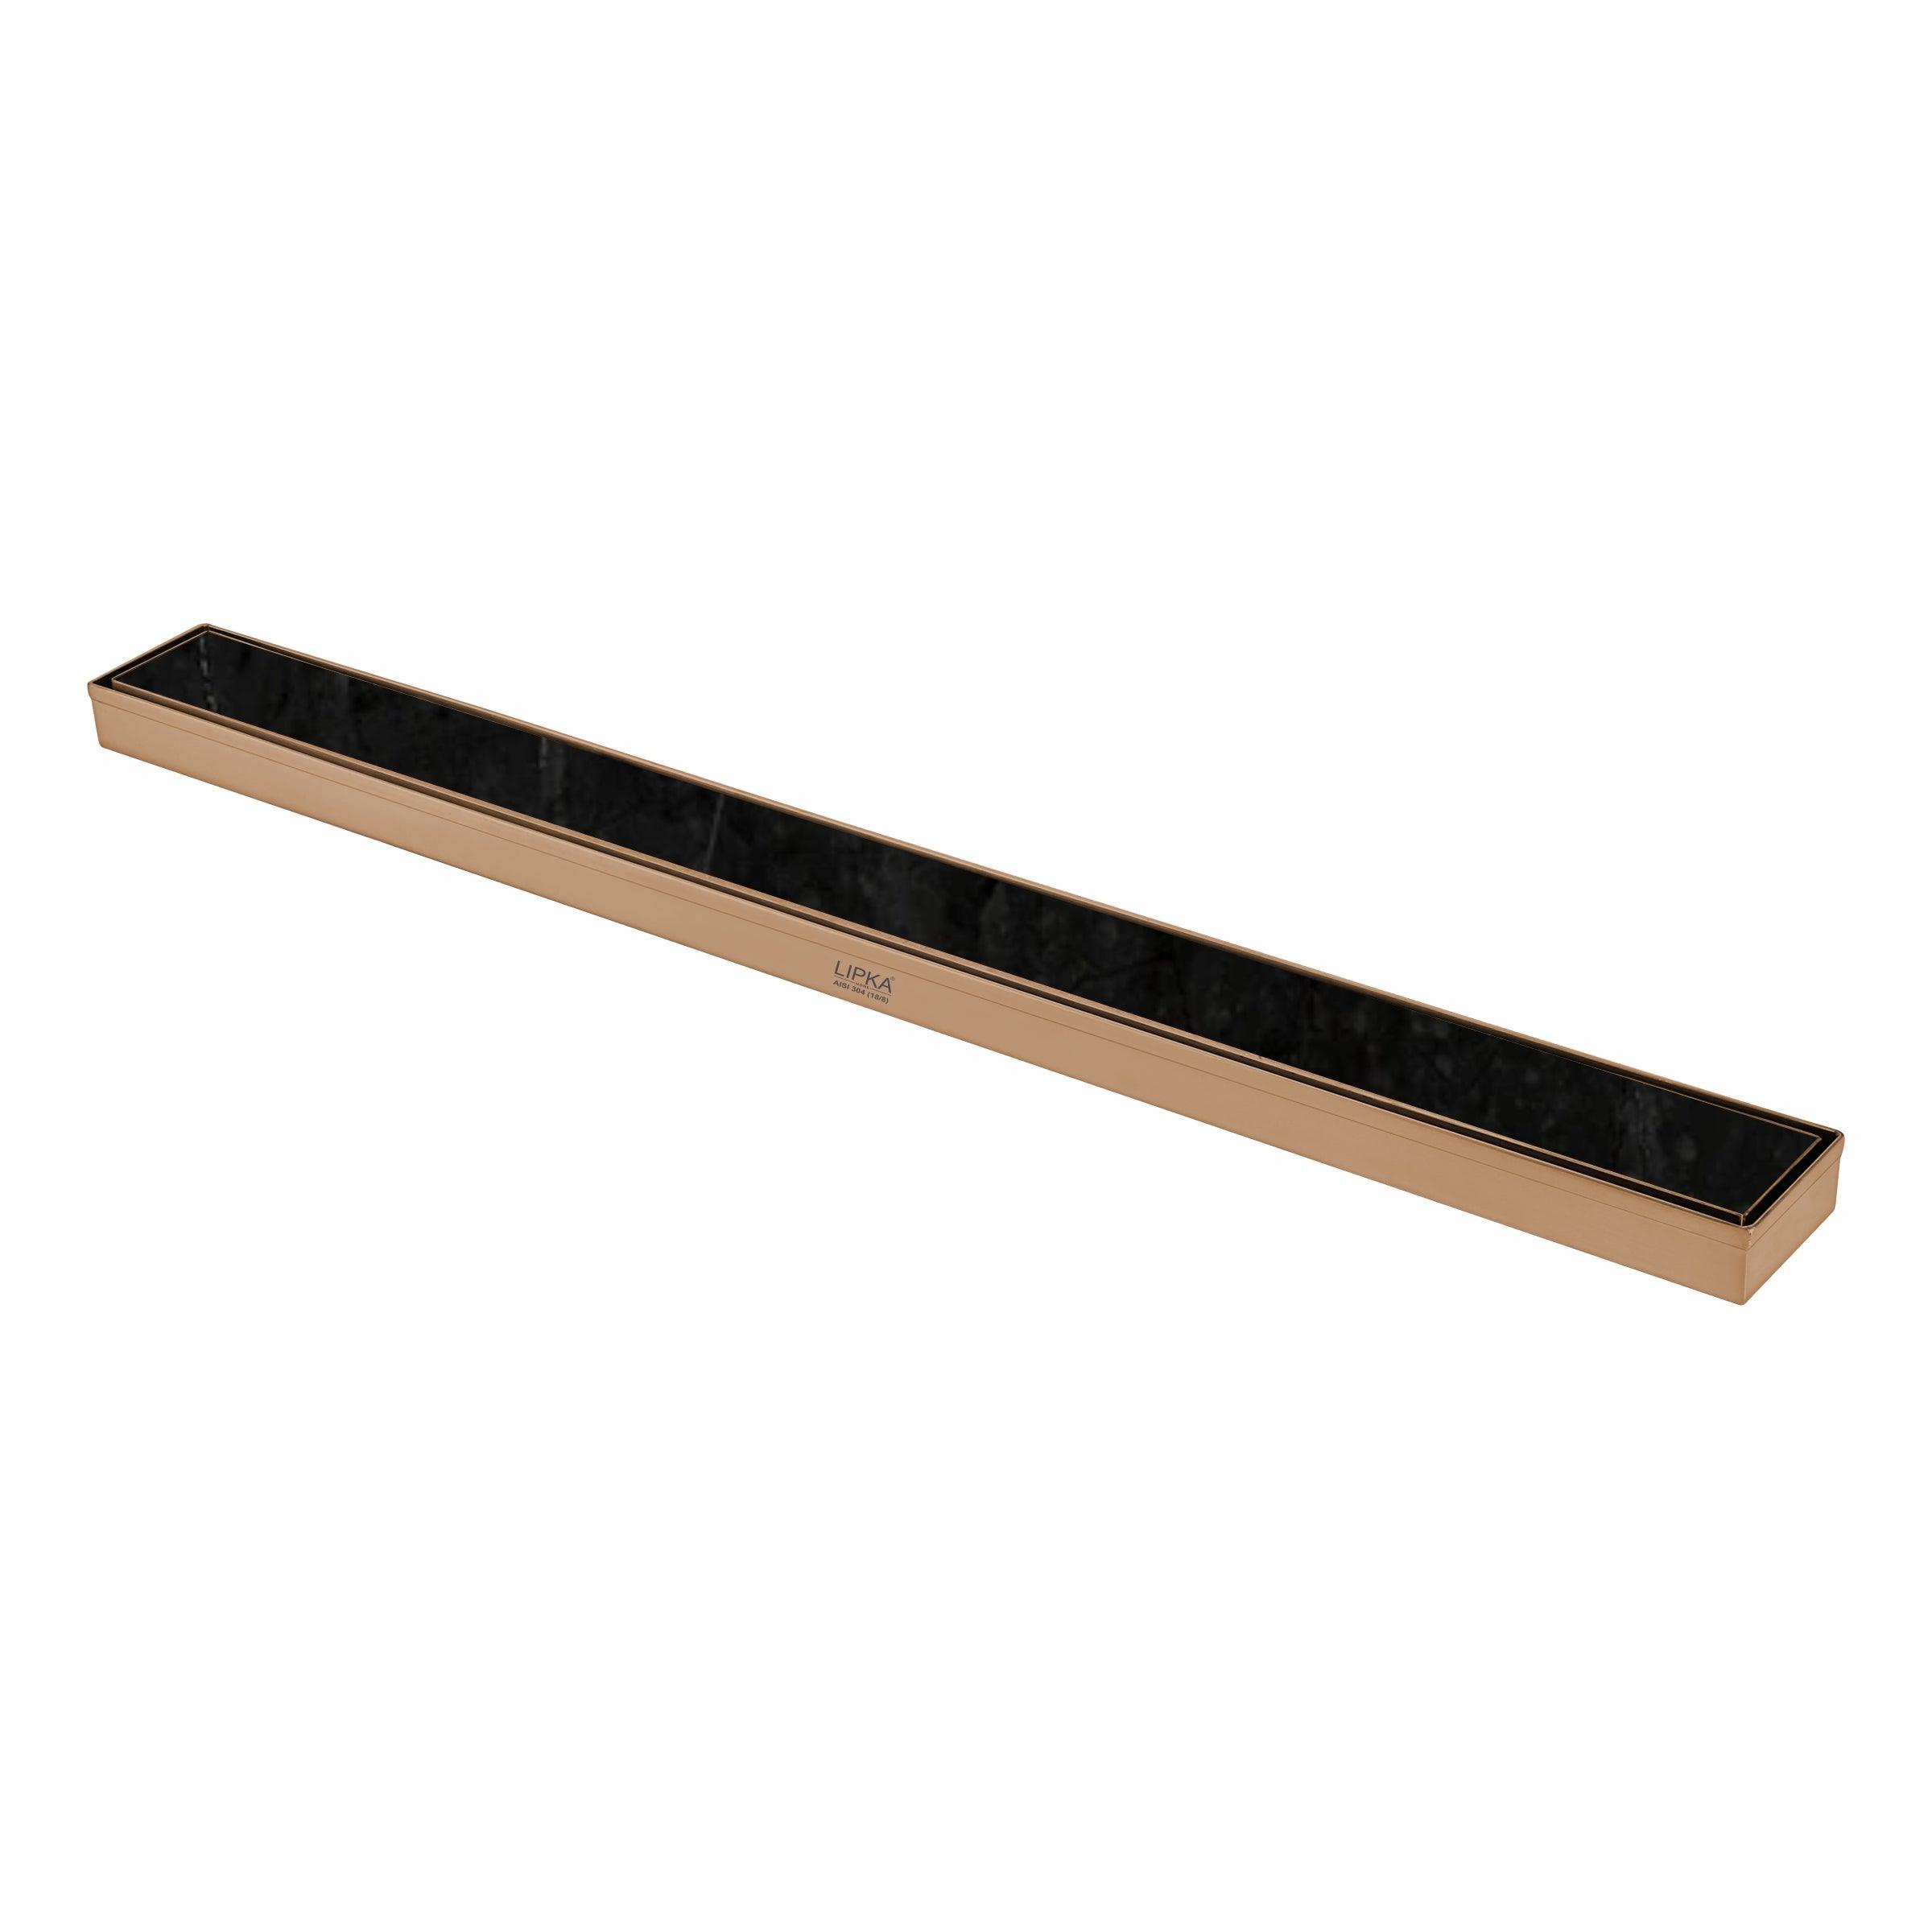 Tile Insert Shower Drain Channel - Yellow Gold (32 x 2 Inches) 